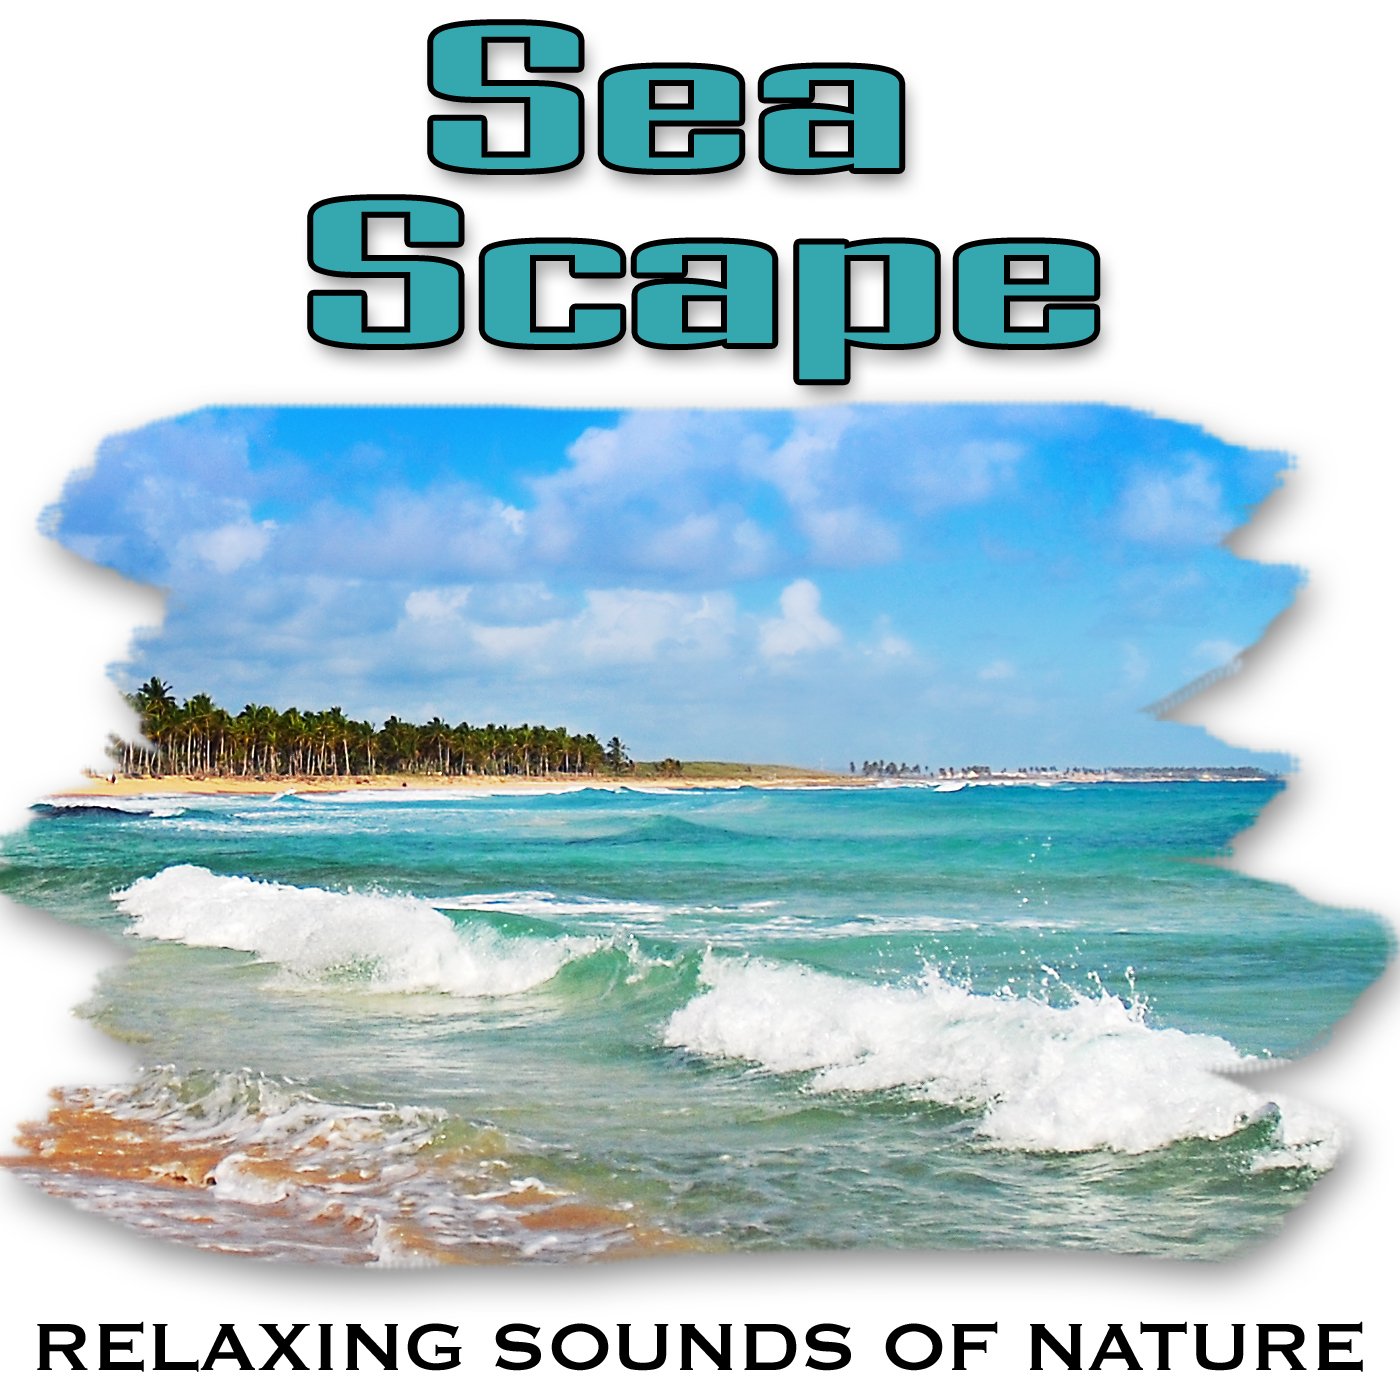 Natural last. Relaxing Sounds. Nature Sounds for Relaxation. Be Calm like the Ocean. Relaxing Sounds of the Wild.